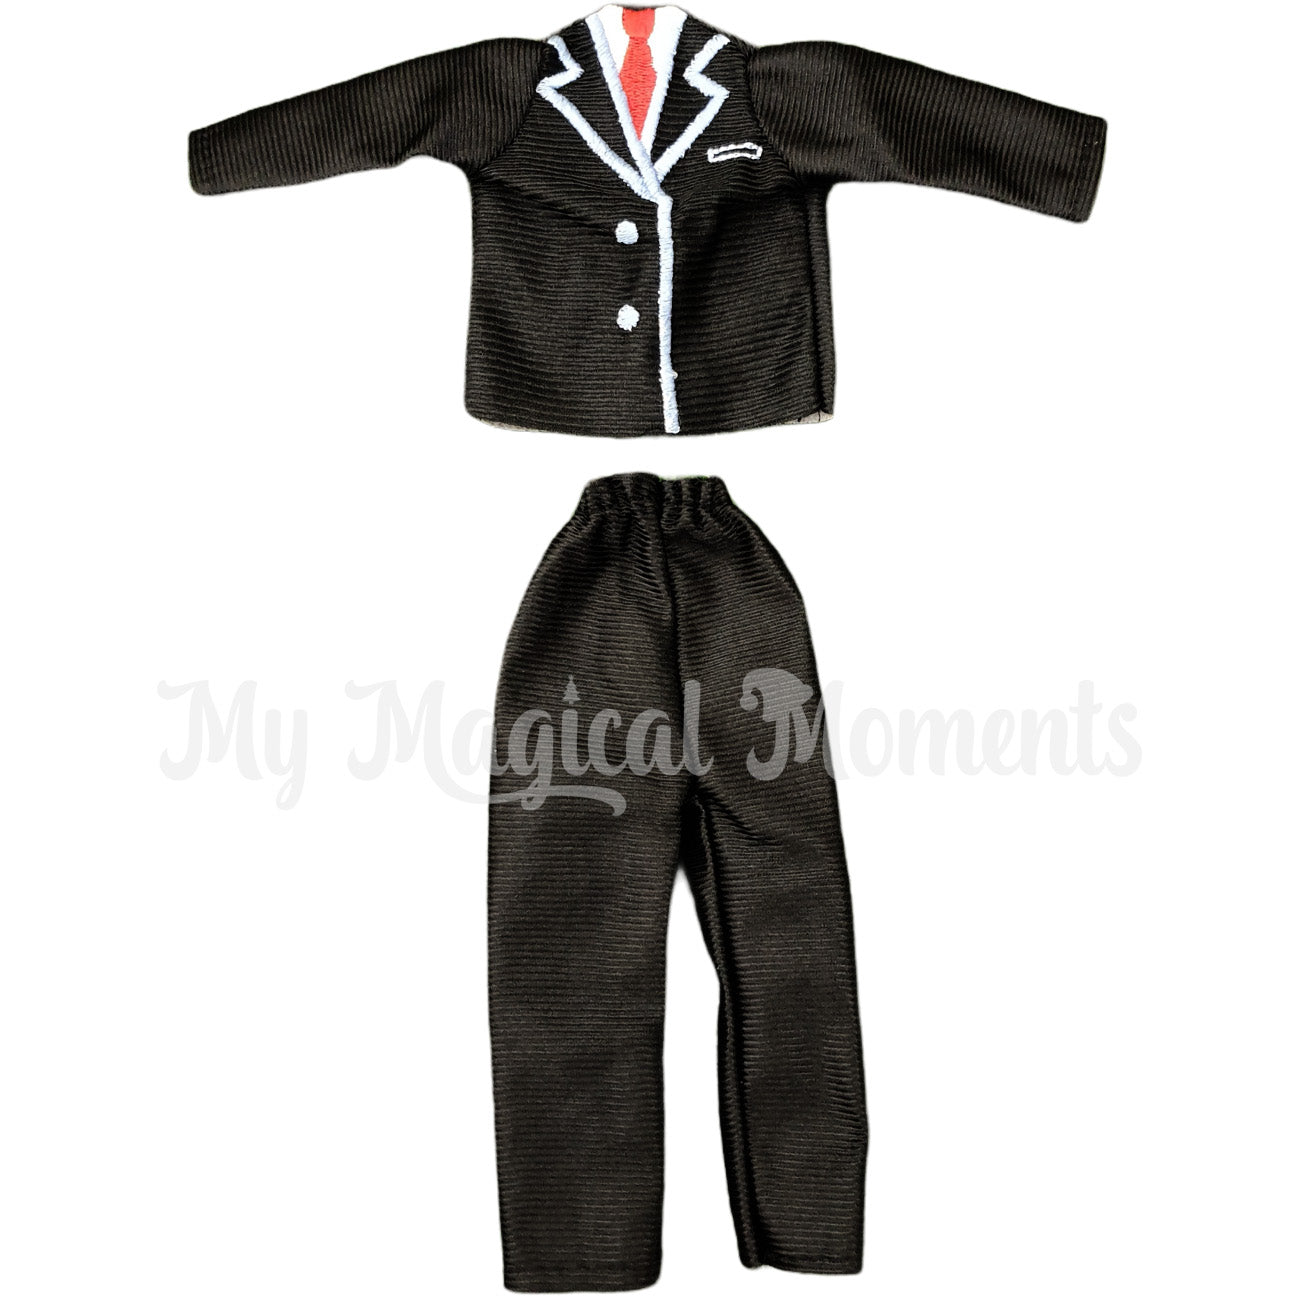 Elf suit with Tuxedo top and pants